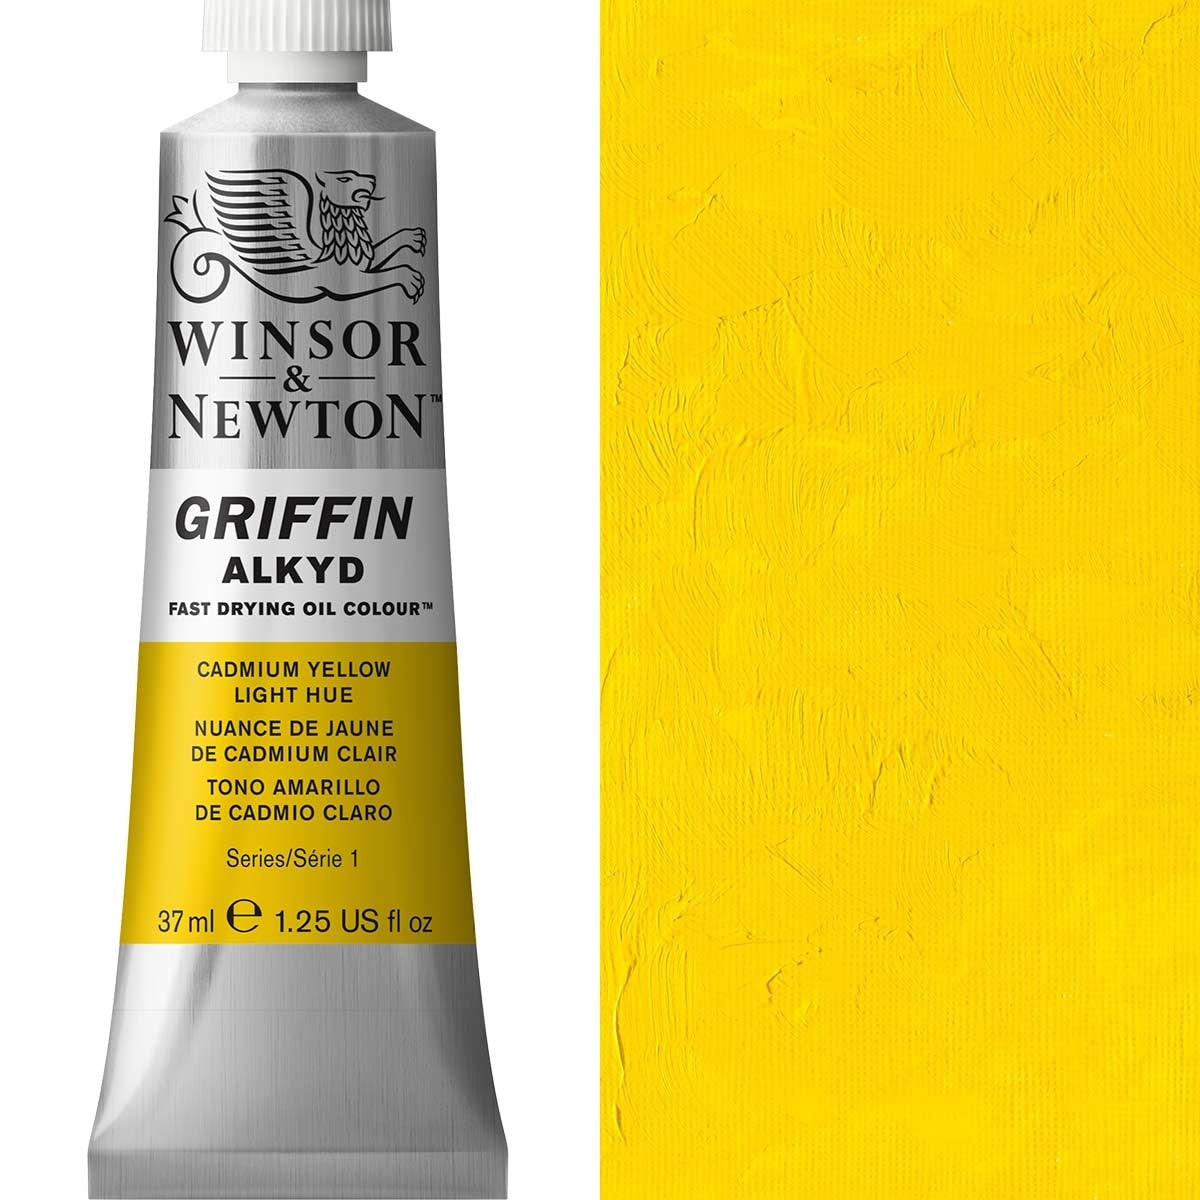 Winsor and Newton - Griffin ALKYD Oil Colour - 37ml - Cadmium Yellow Light Hue